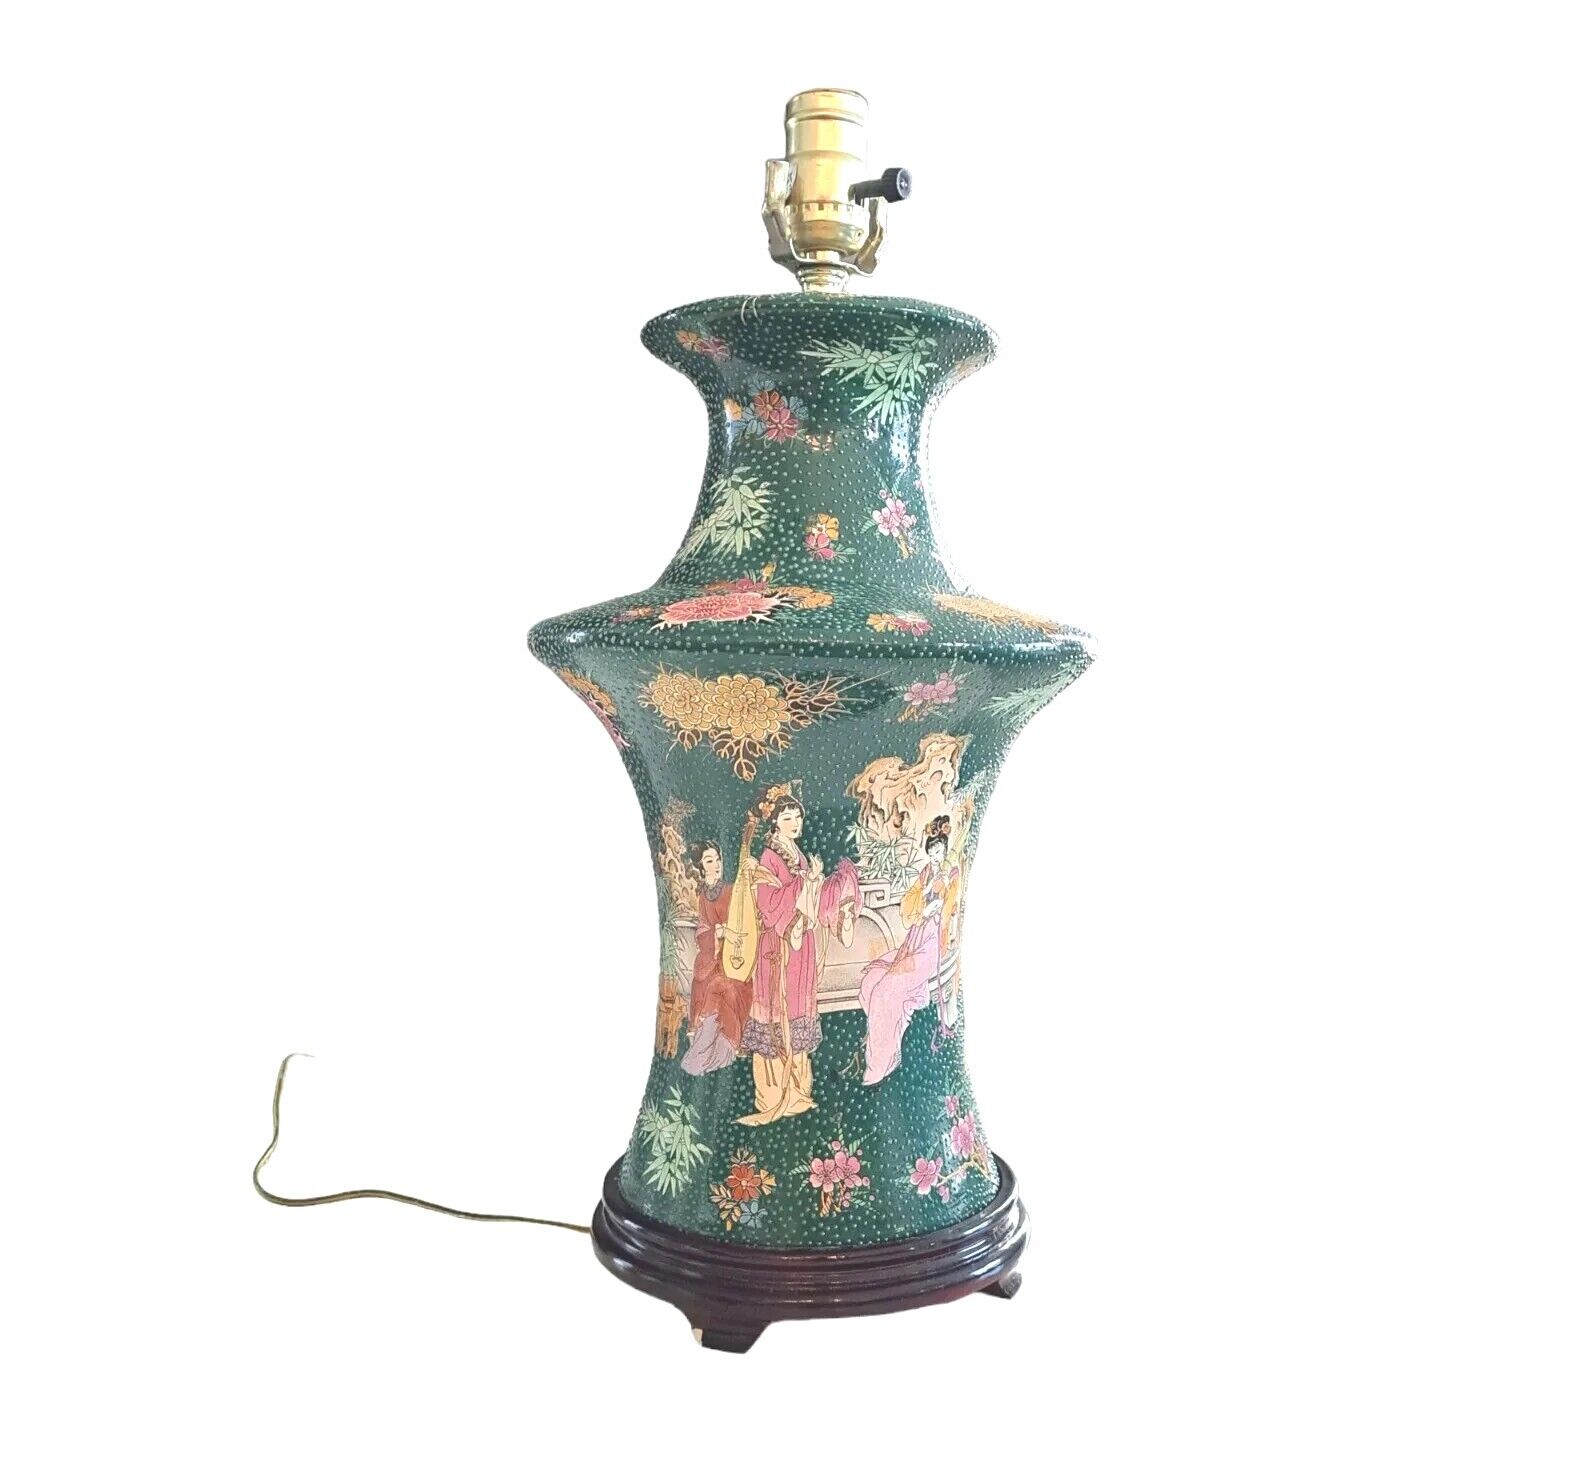 Vintage Asian Hand Painted Girls Musician On A Garden Table Lamp Desk LAMP